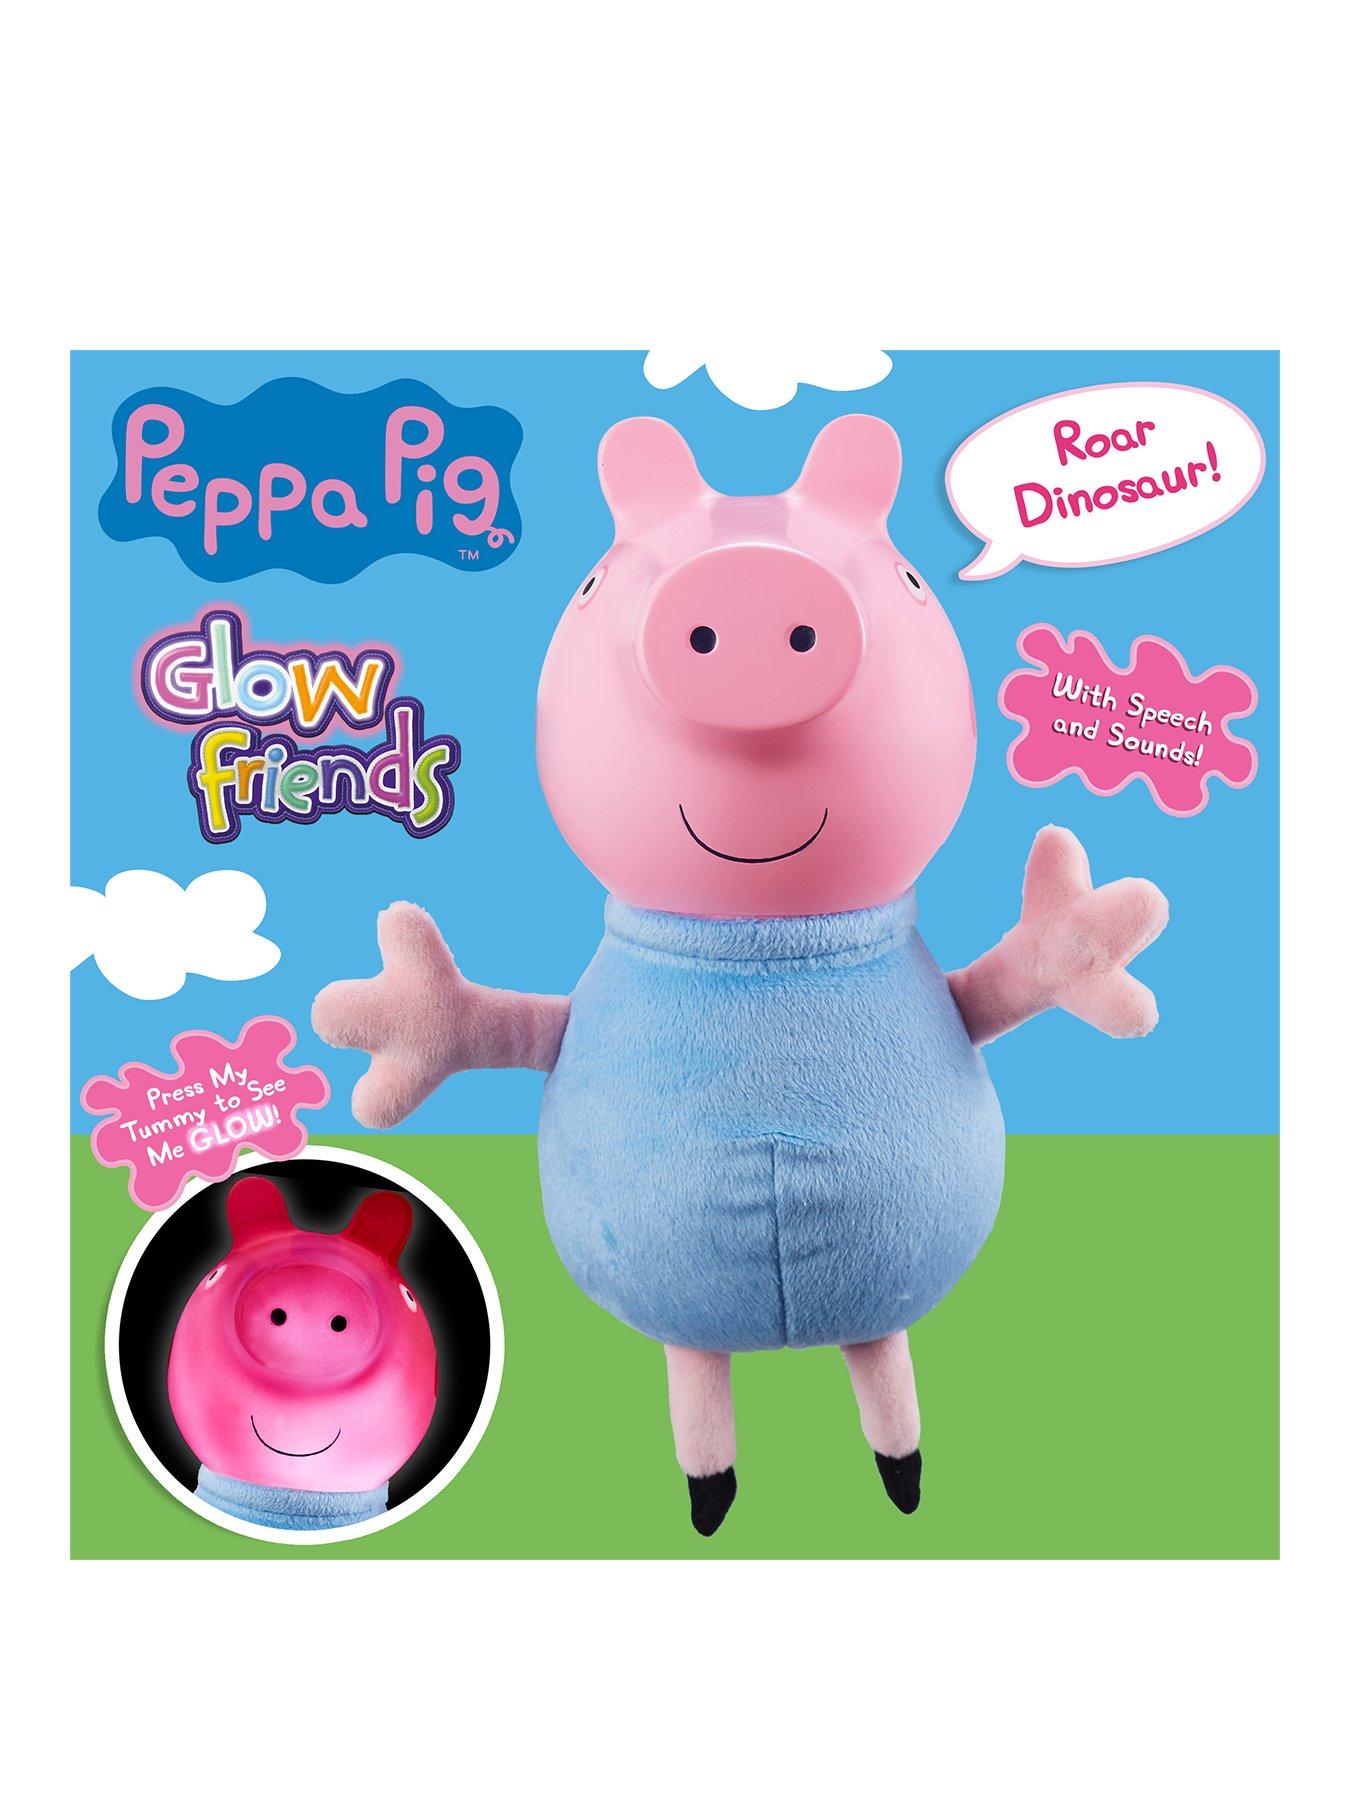 peppa pig toys 18 months